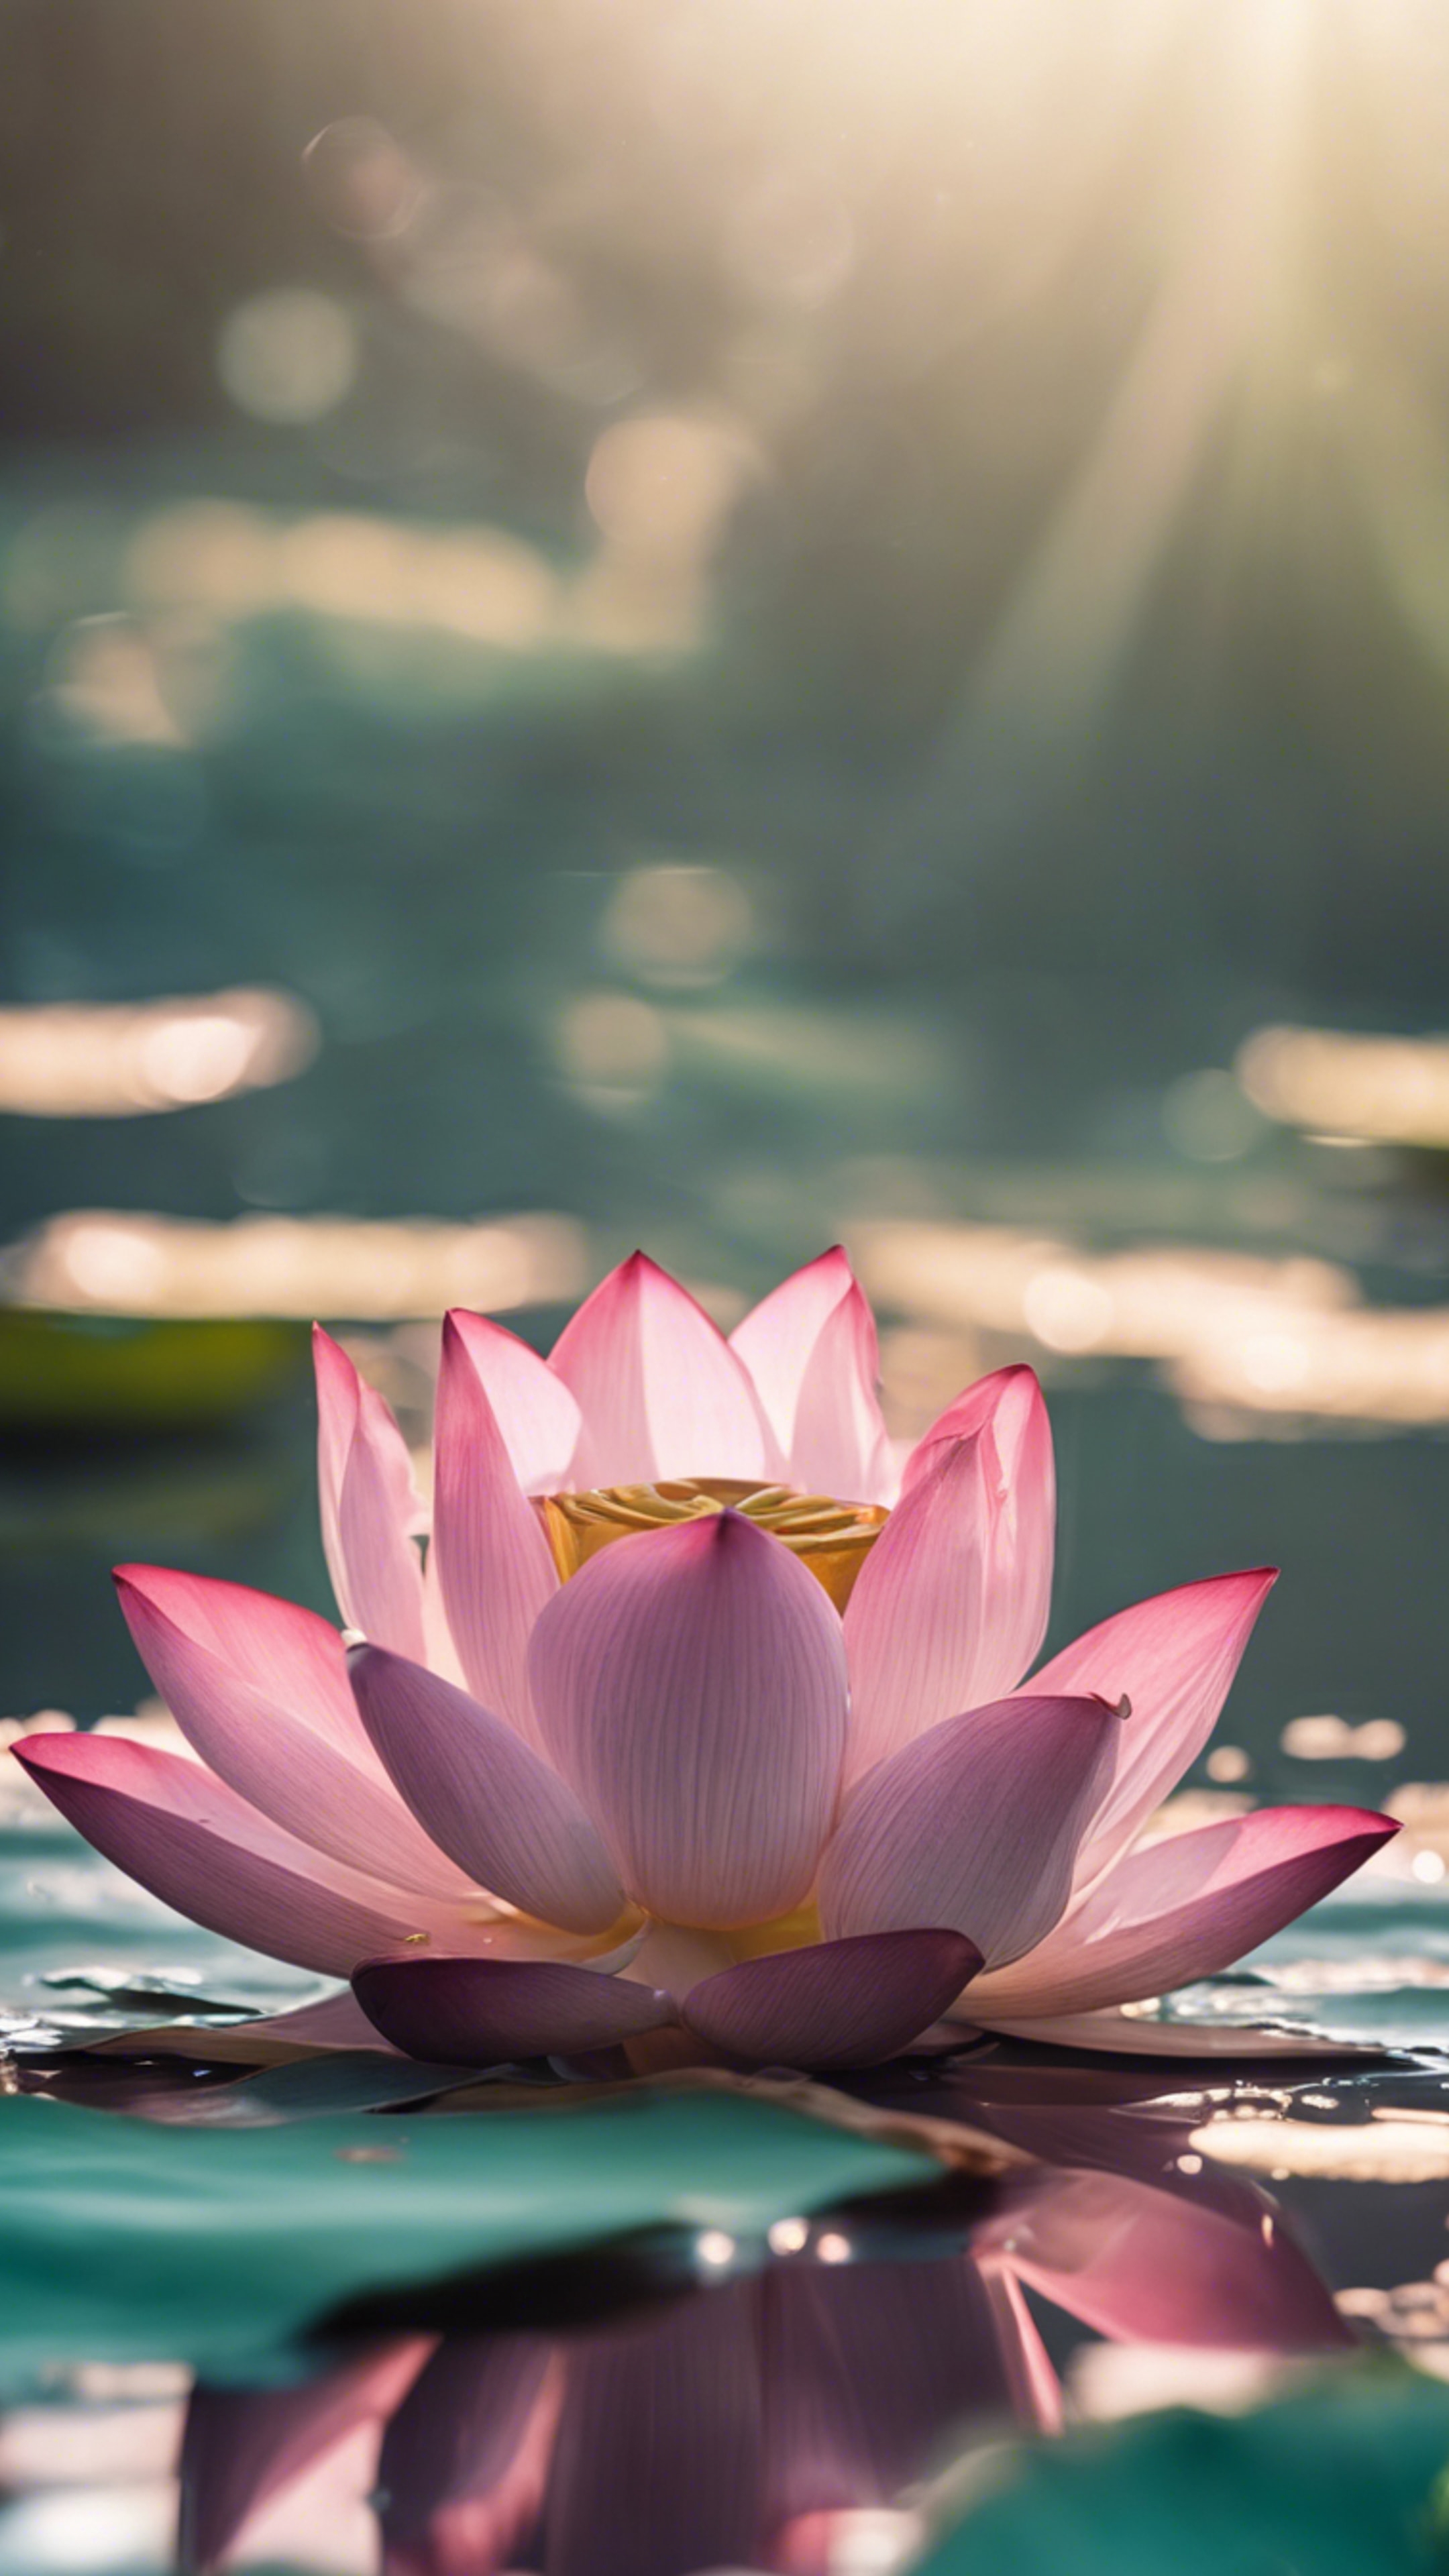 A close-up image of a single blooming lotus on a clear pond. 墙纸[056d411e4bd14d9f8d69]